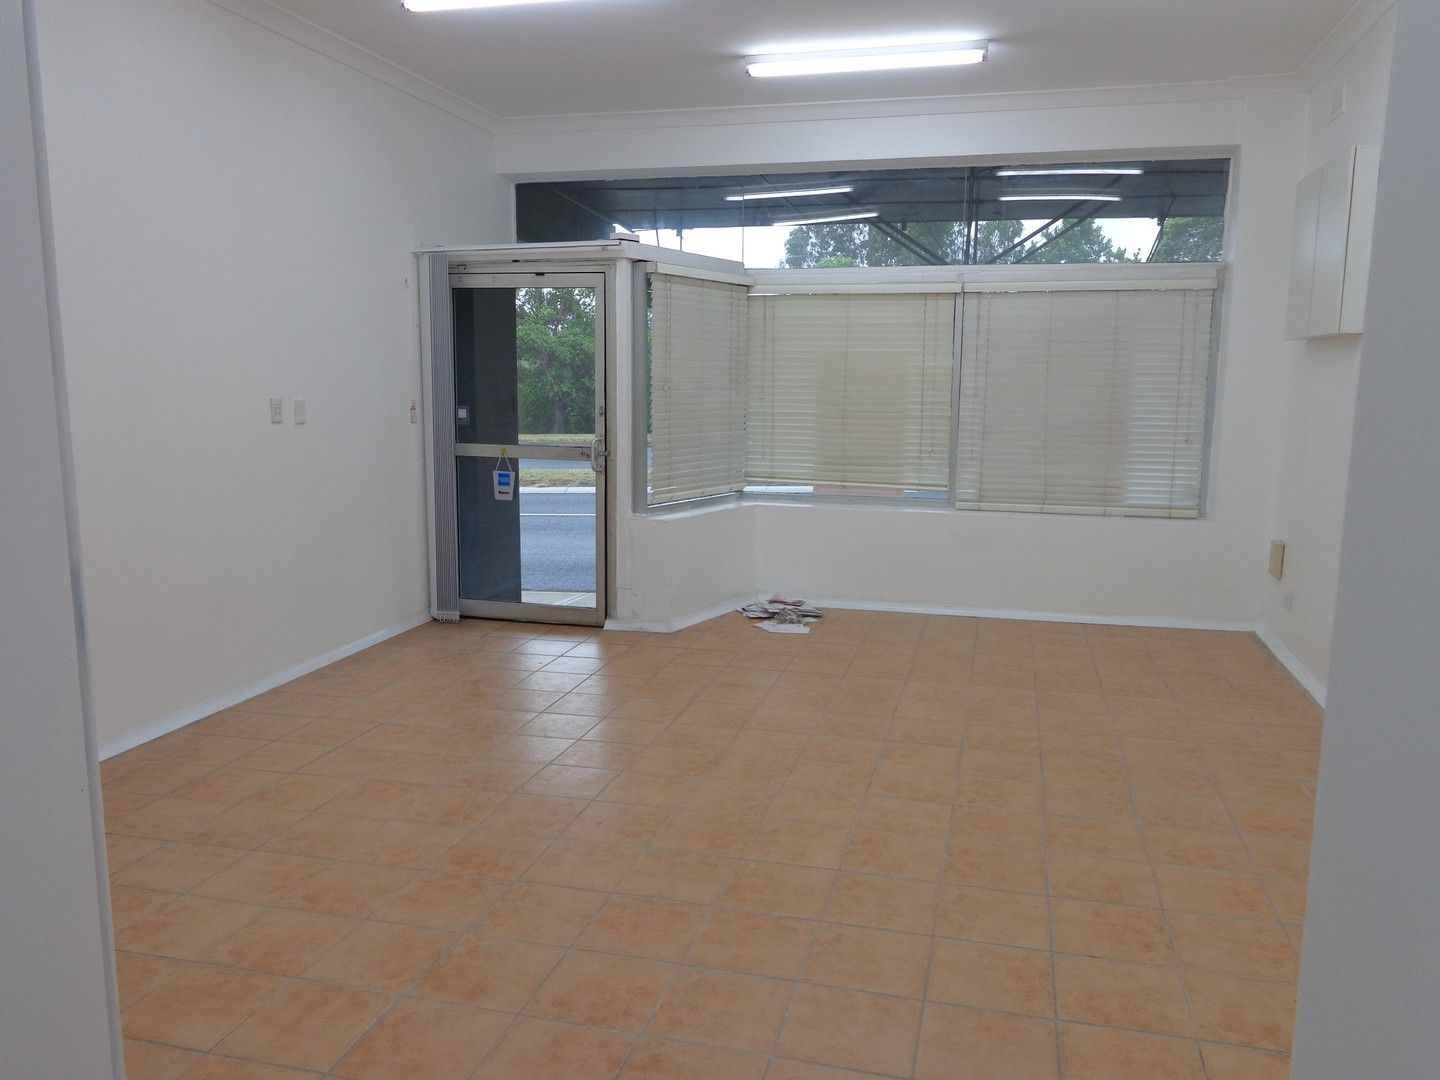 2 bedrooms House in 59 Hume Highway GREENACRE NSW, 2190